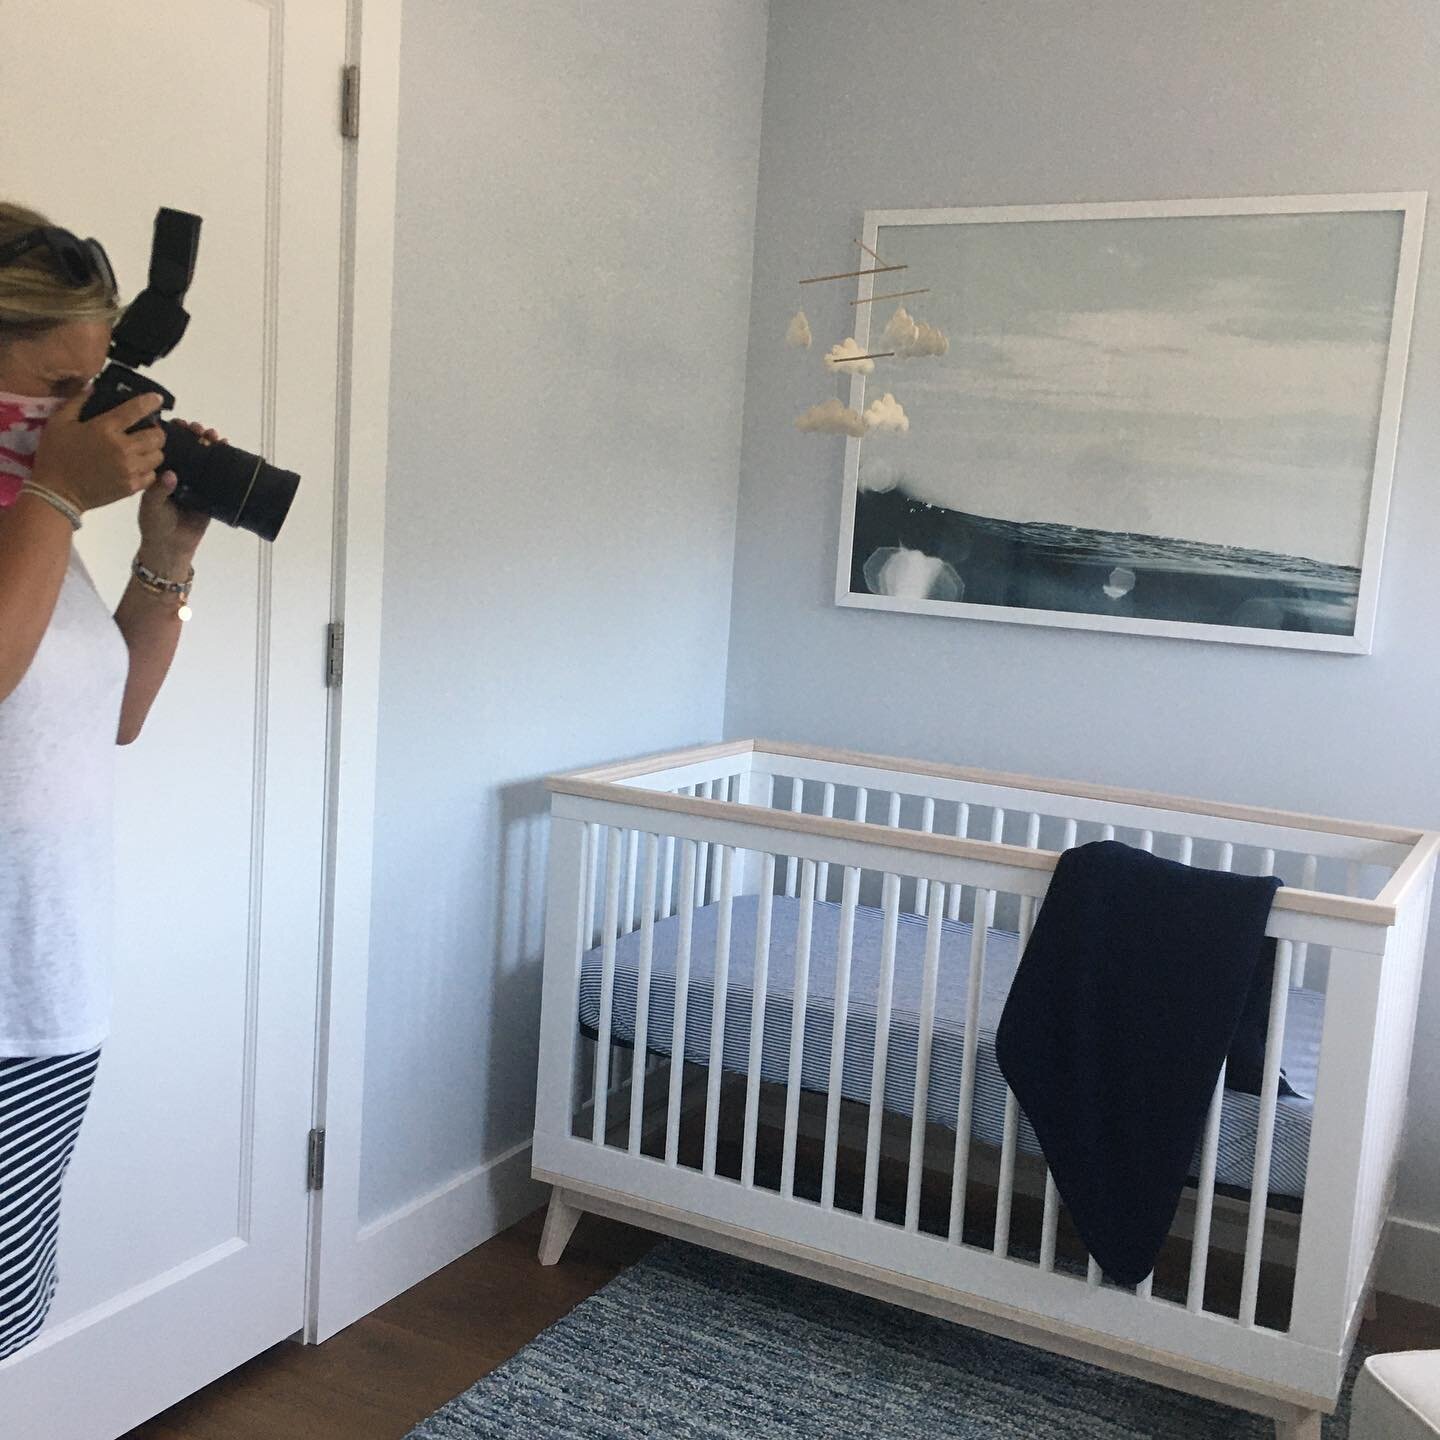 Behind the scene shot of @lindseymastersonphotography shooting my latest project, a sweet nursery for baby boy 💙 #miniinteriordesign